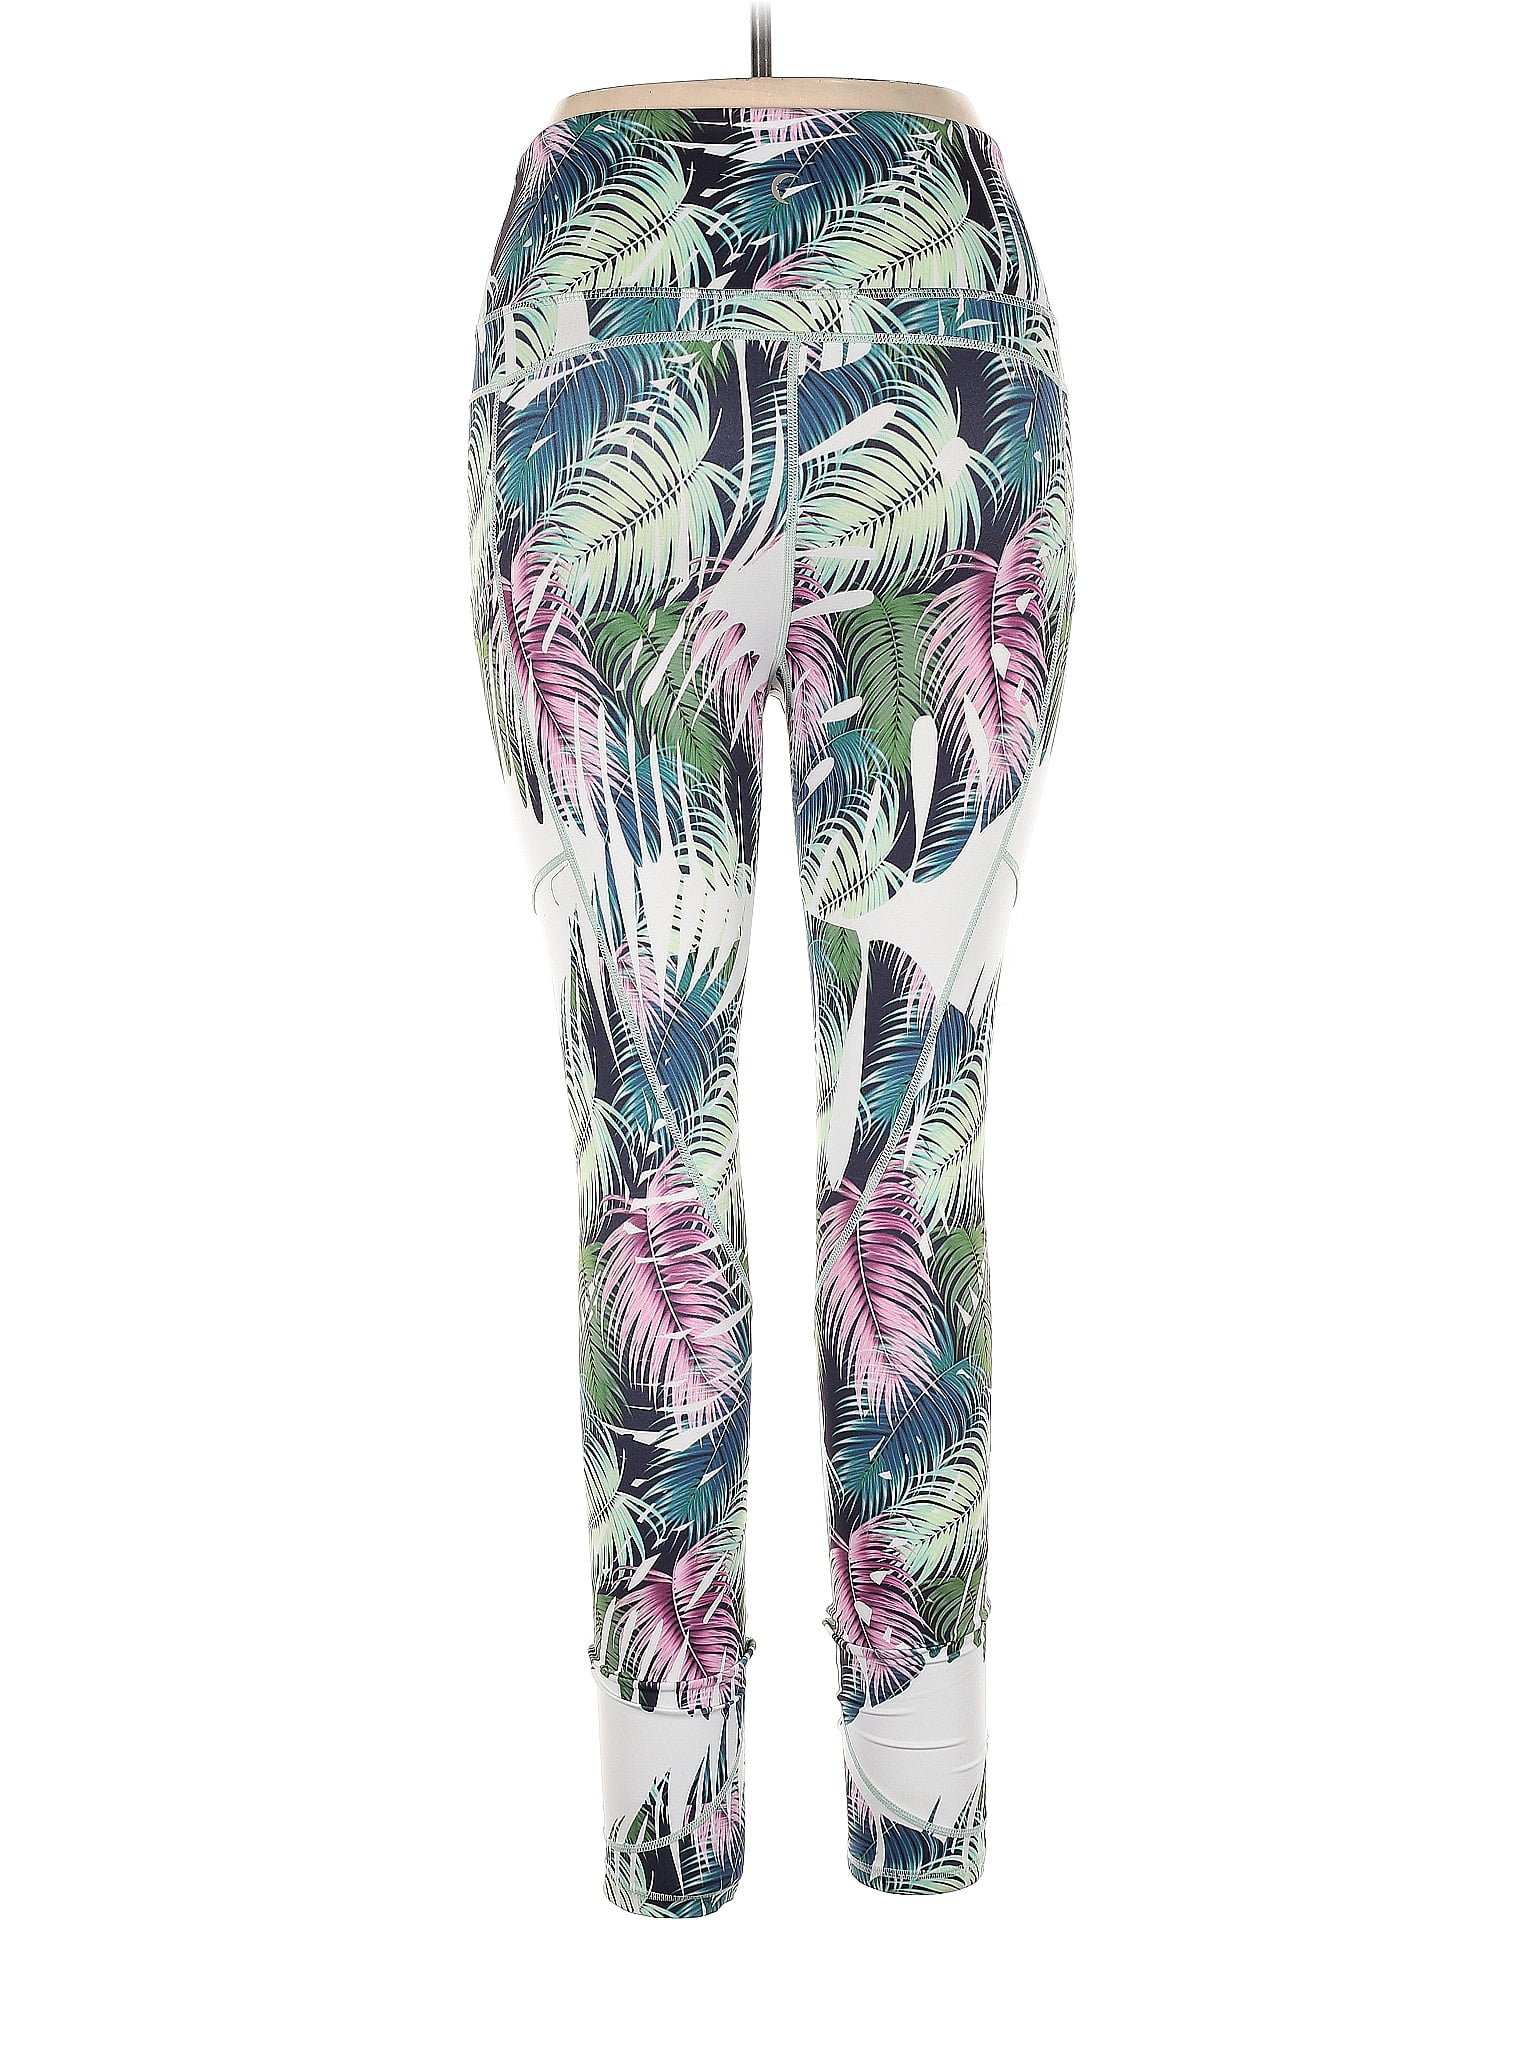 Zyia Active Light N Tight Floral Active Wear Leggings Size Medium Womens New